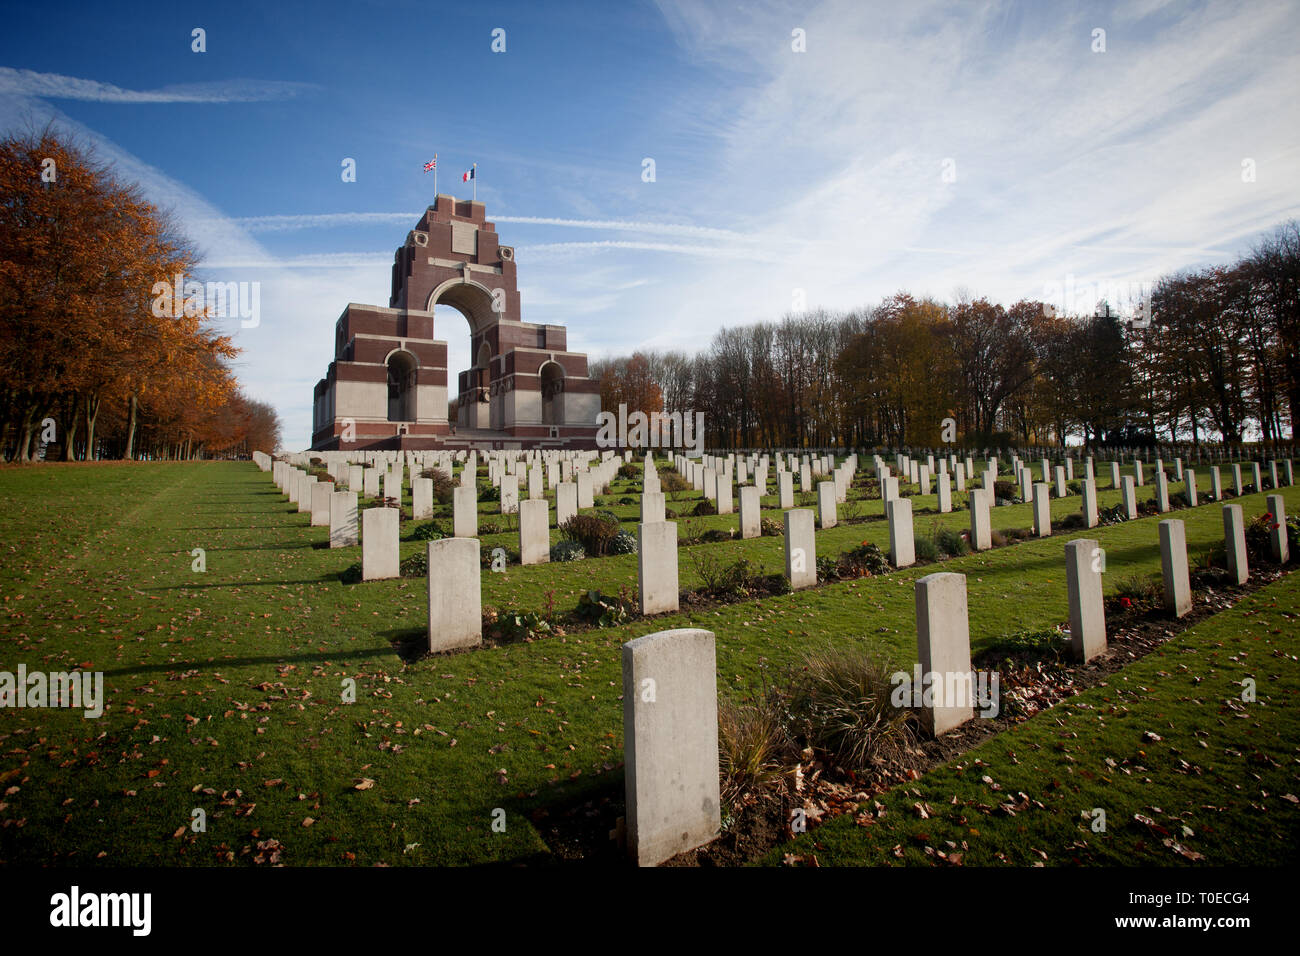 The Theipval memorial commemorates more than 72,000 troops who died in the Somme sector before 20 March 1918 and have no known graves. Stock Photo